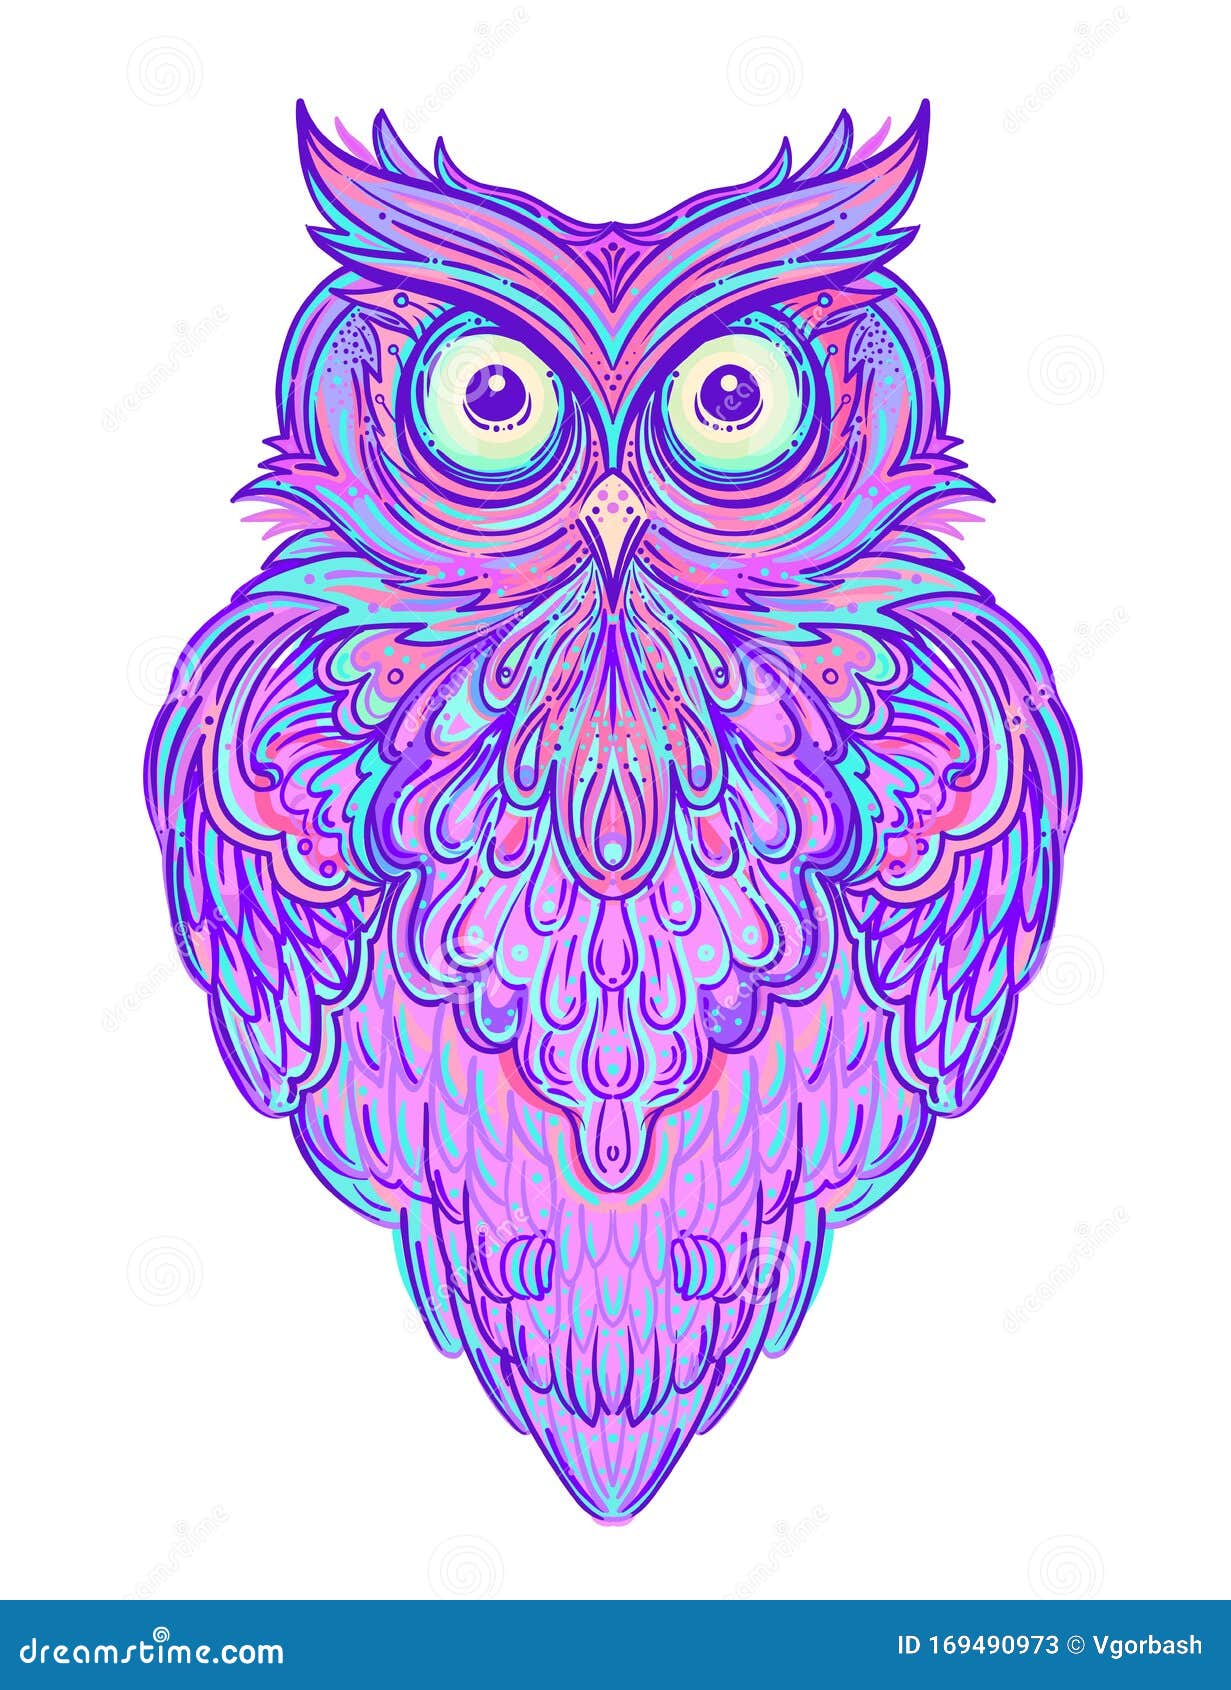 Cute Abstract Owl and Psychedelic Ornate Pattern Character Tattoo Design  for Pet Lovers Artwork for Print Textiles Stock Vector  Illustration of  ornate floral 169490973